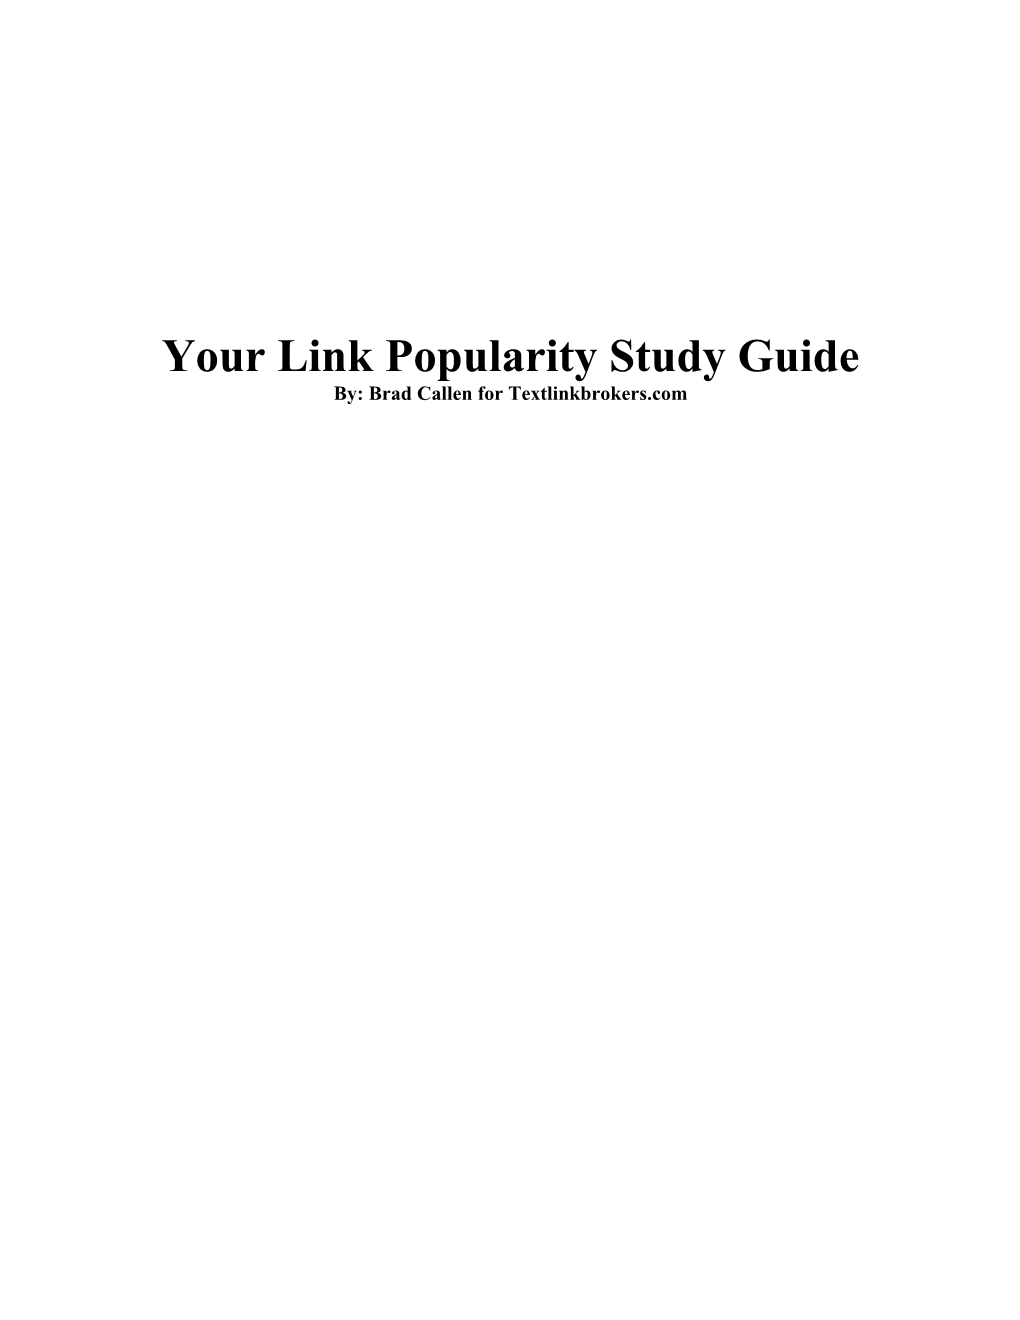 Your Guide on Link Popularity